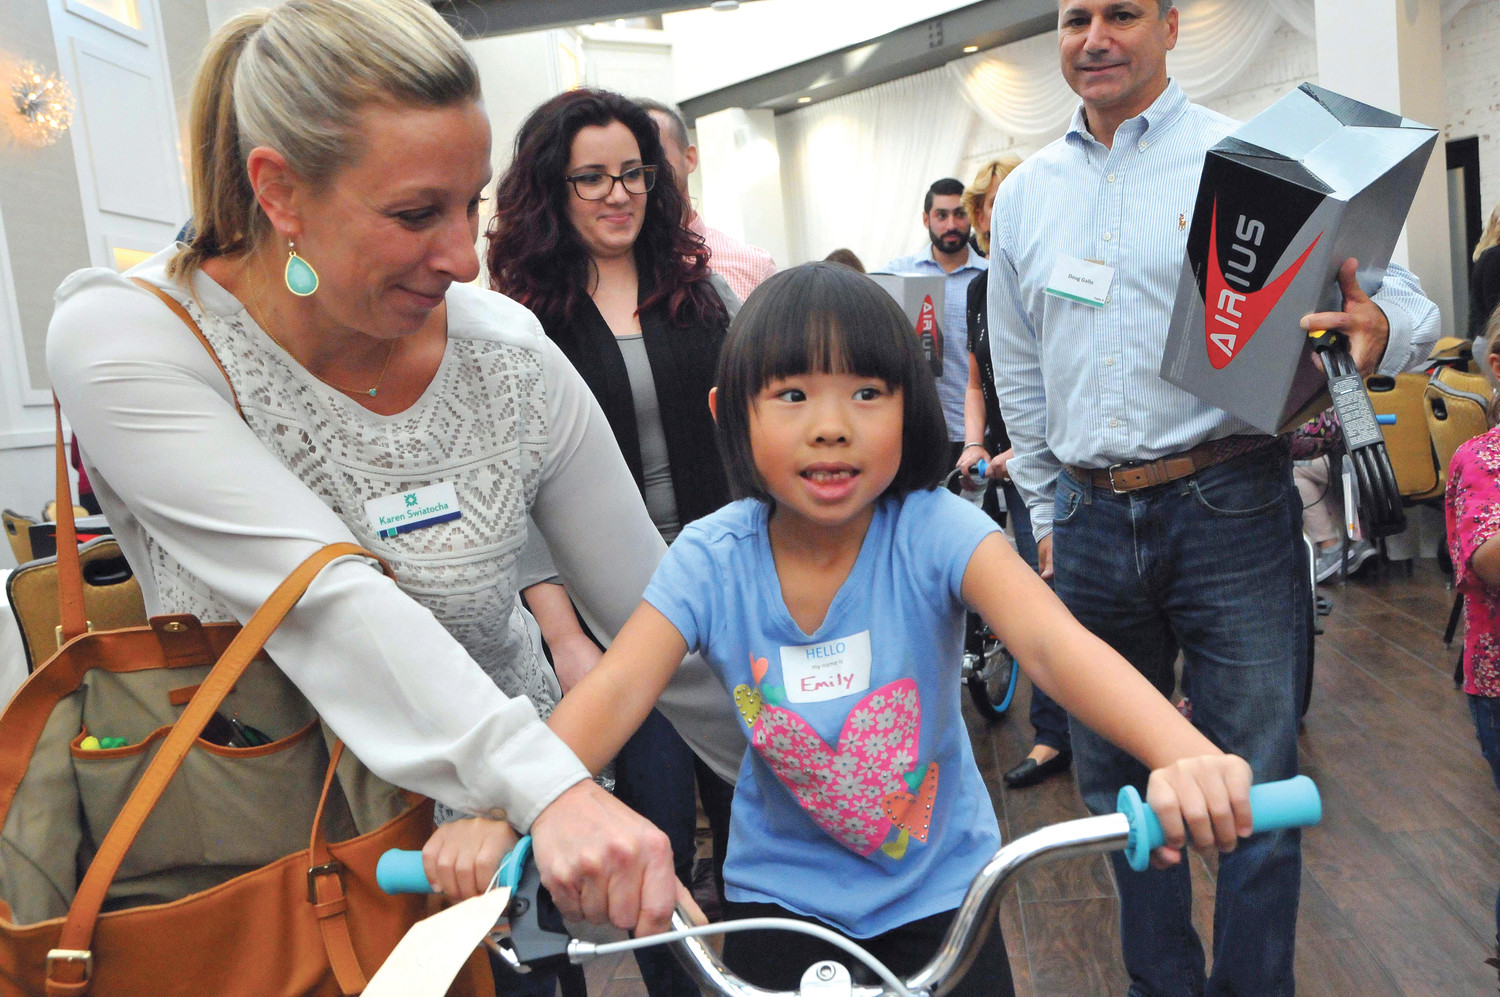 READY TO RIDE: Karen Swiatocha makes sure that first grade student Emily has her balance.